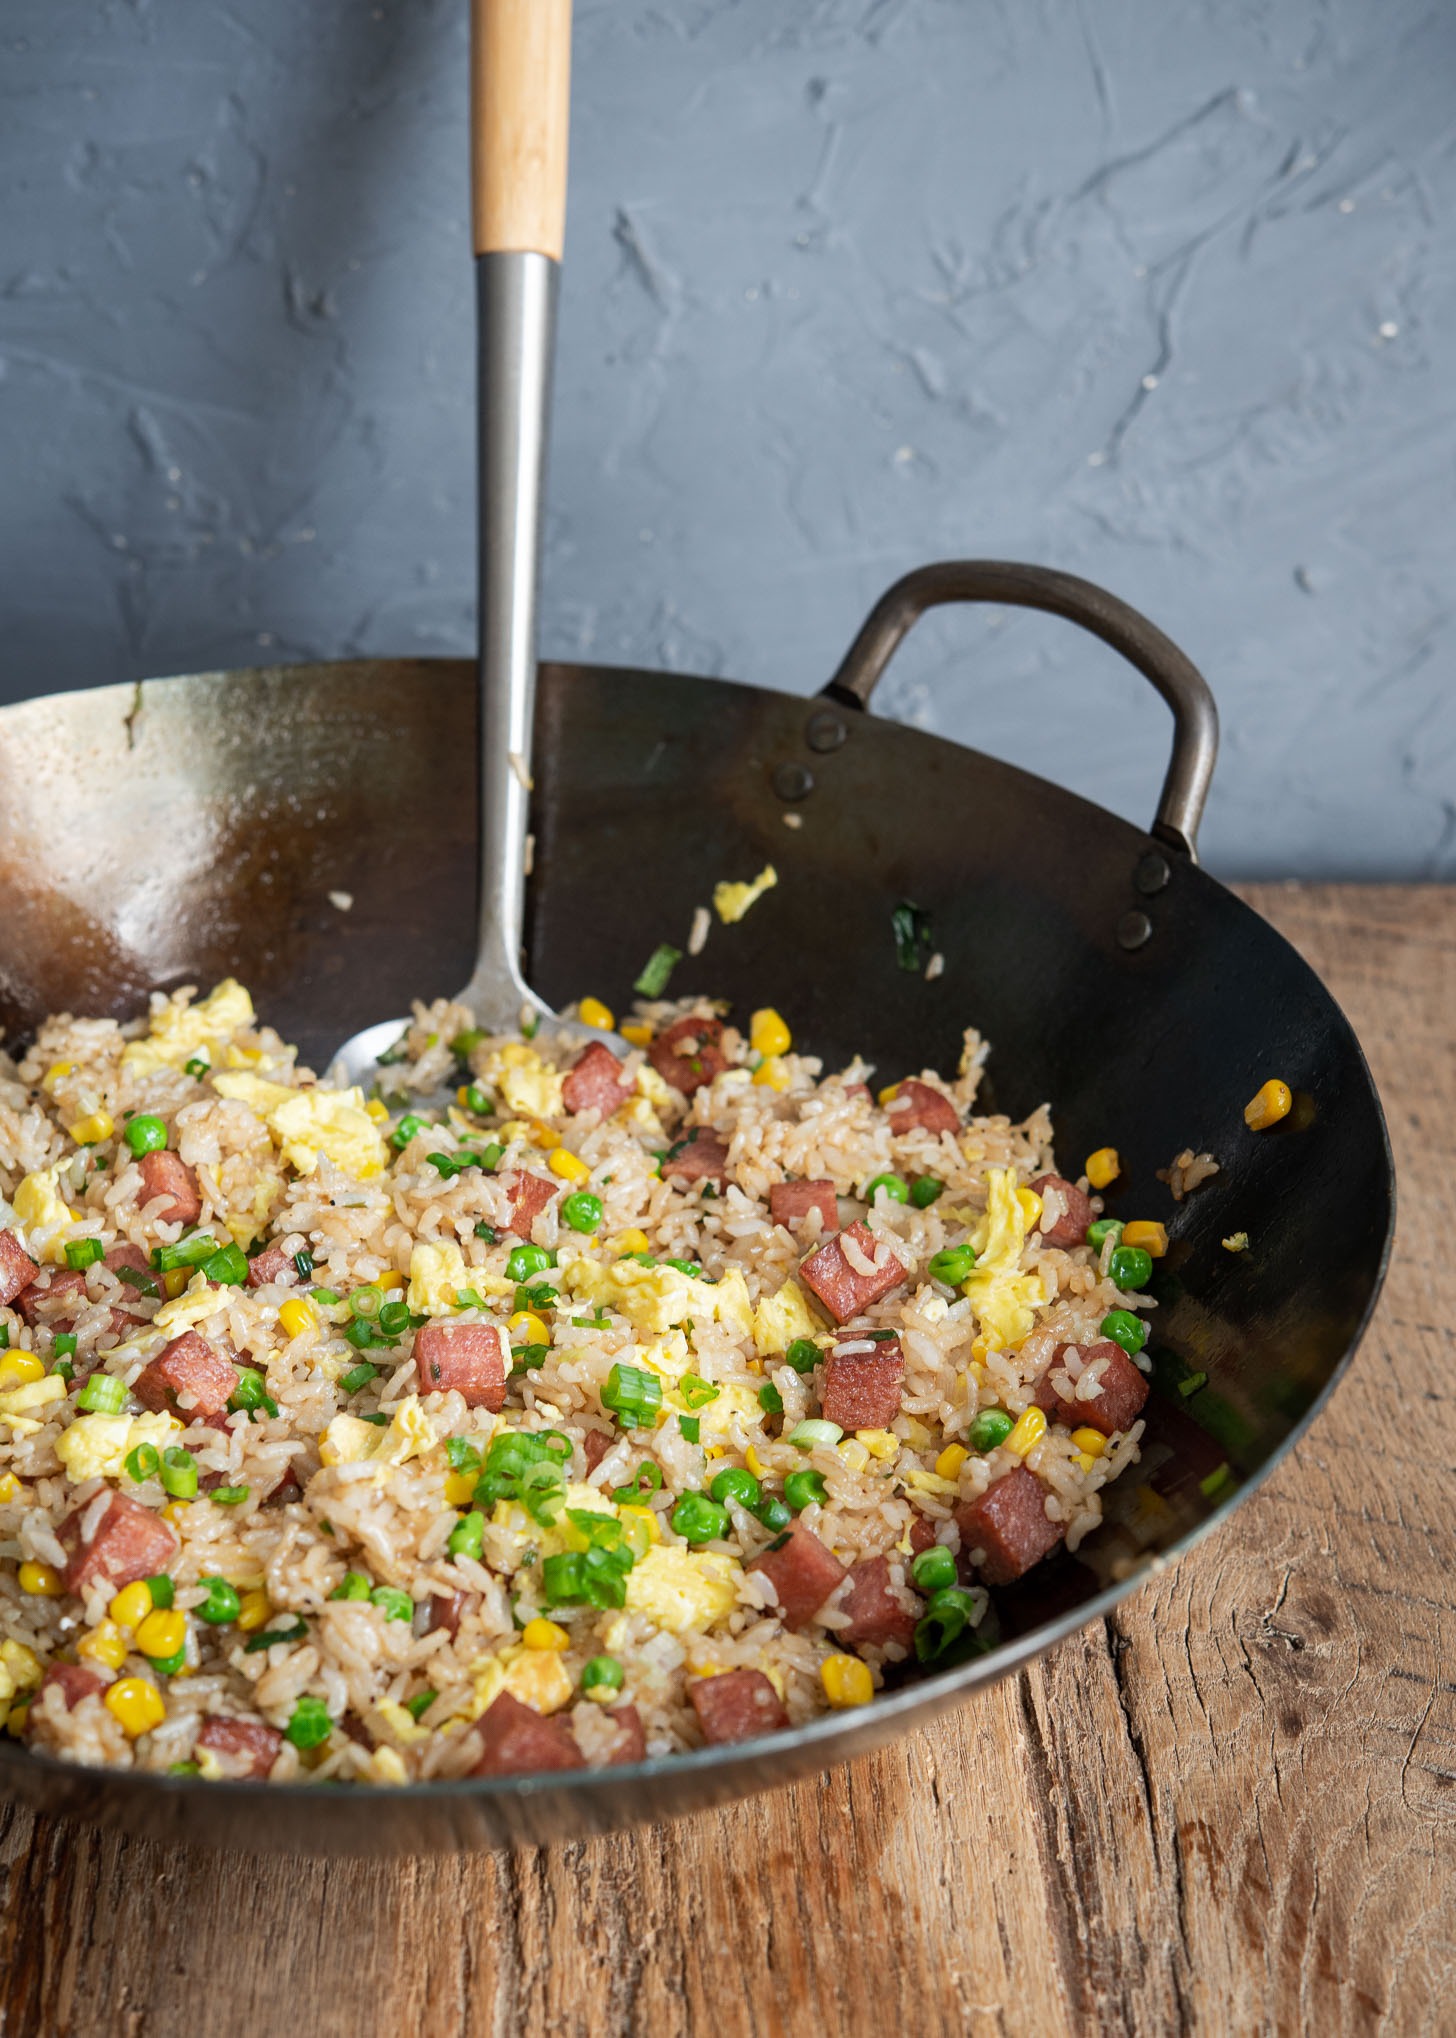 Fried rice is made with spam, peas, and corn with day-old rice in a wok.